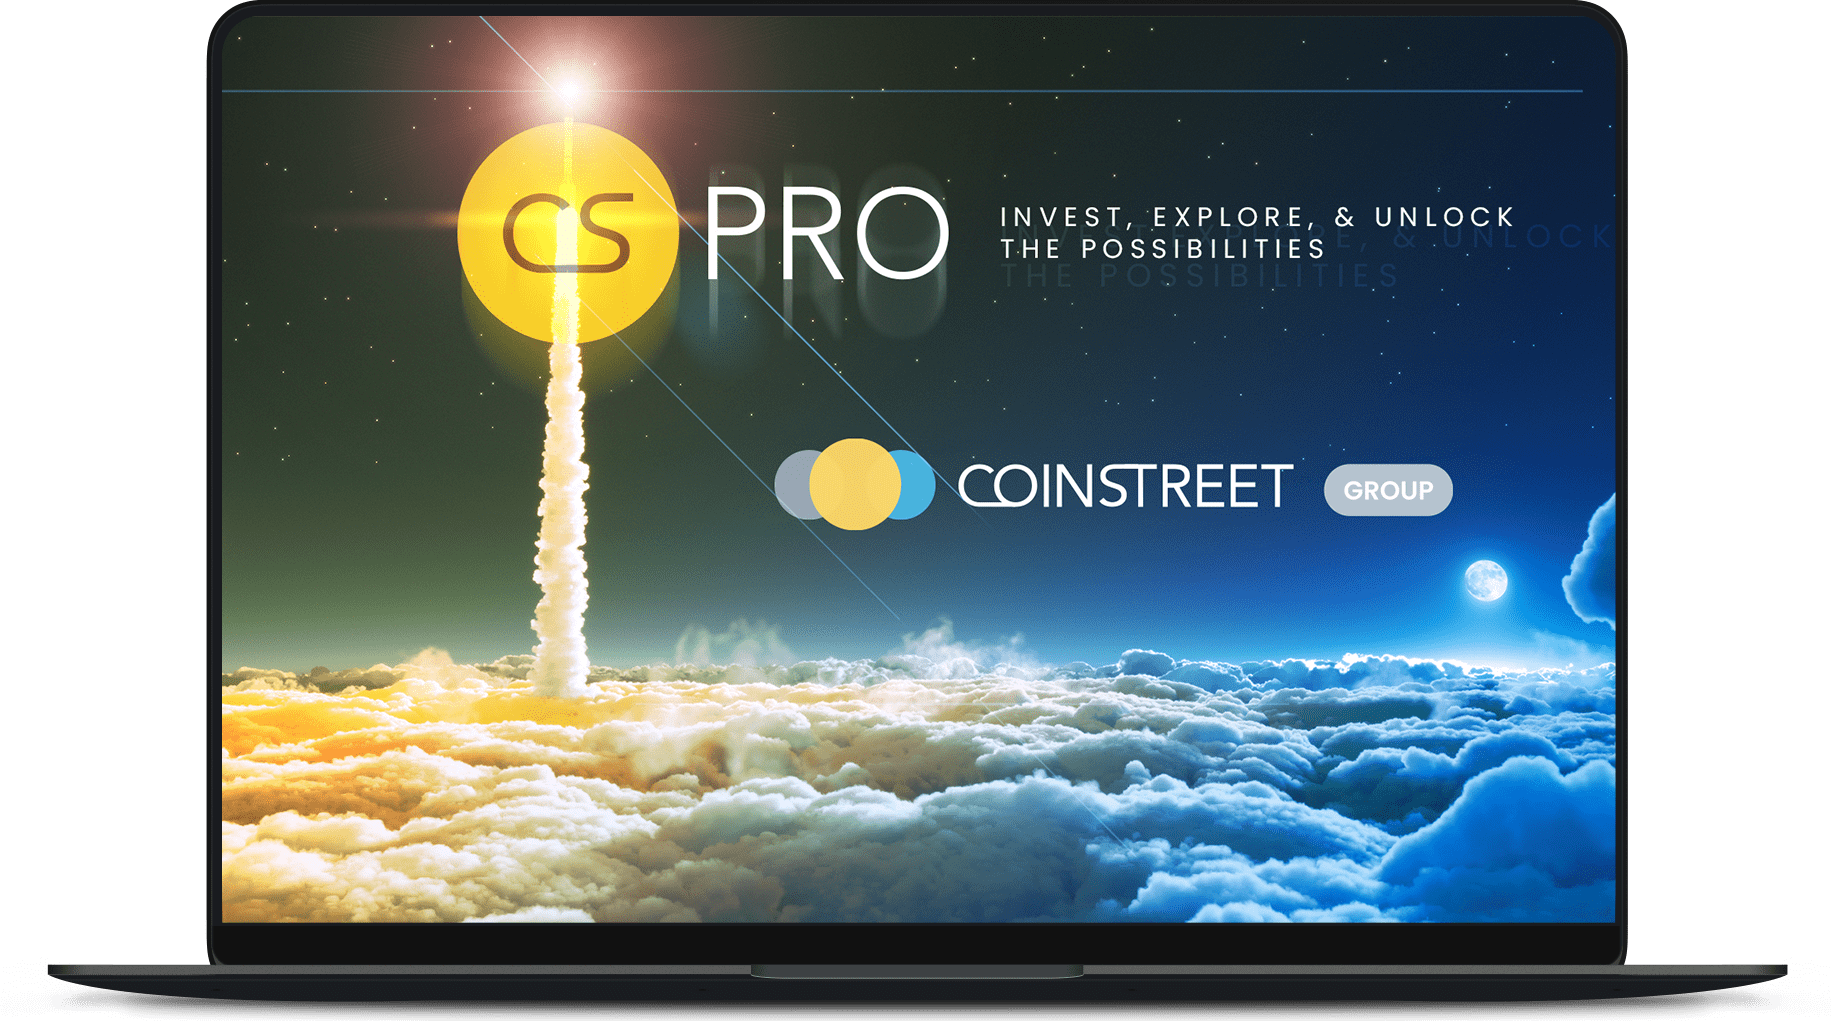 Coinstreet Group